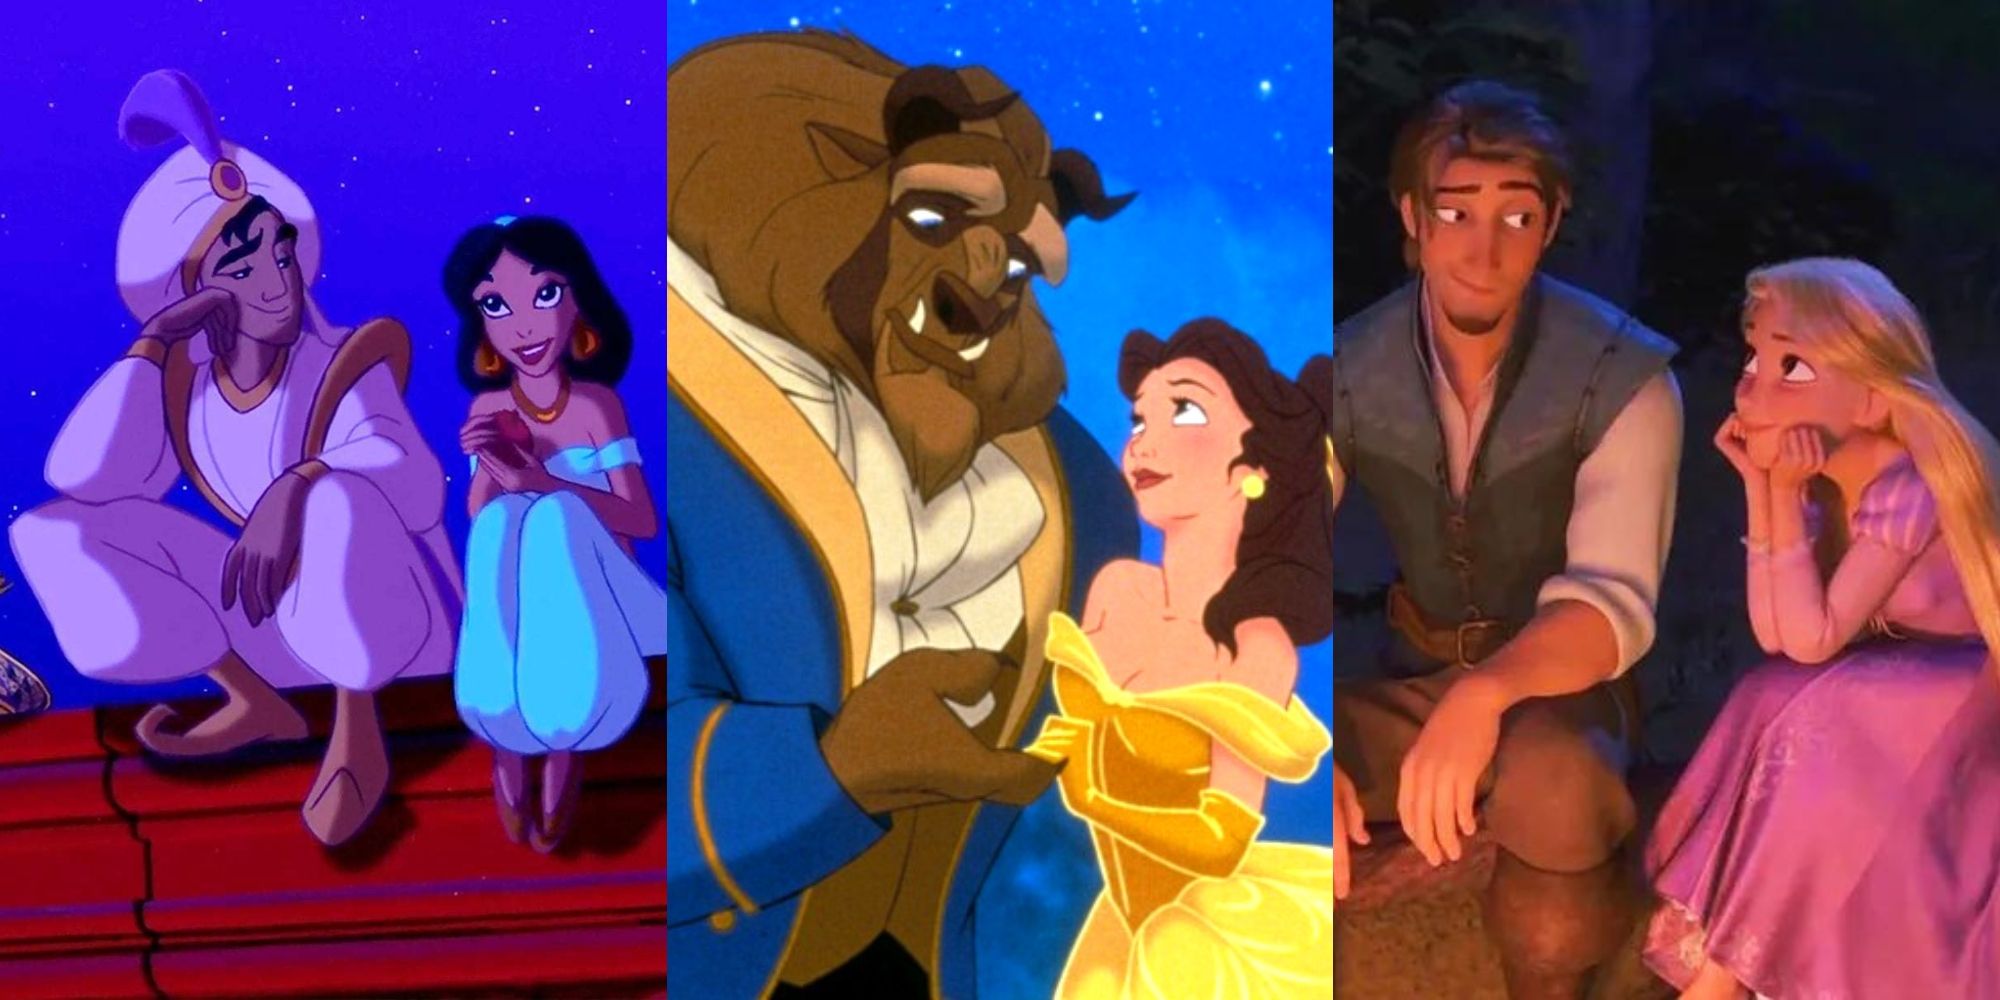 Aladdin And Jasmine in Aladdin, Belle And The Beast in Beauty and the Beast, Flynn And Rapunzel in Tangled